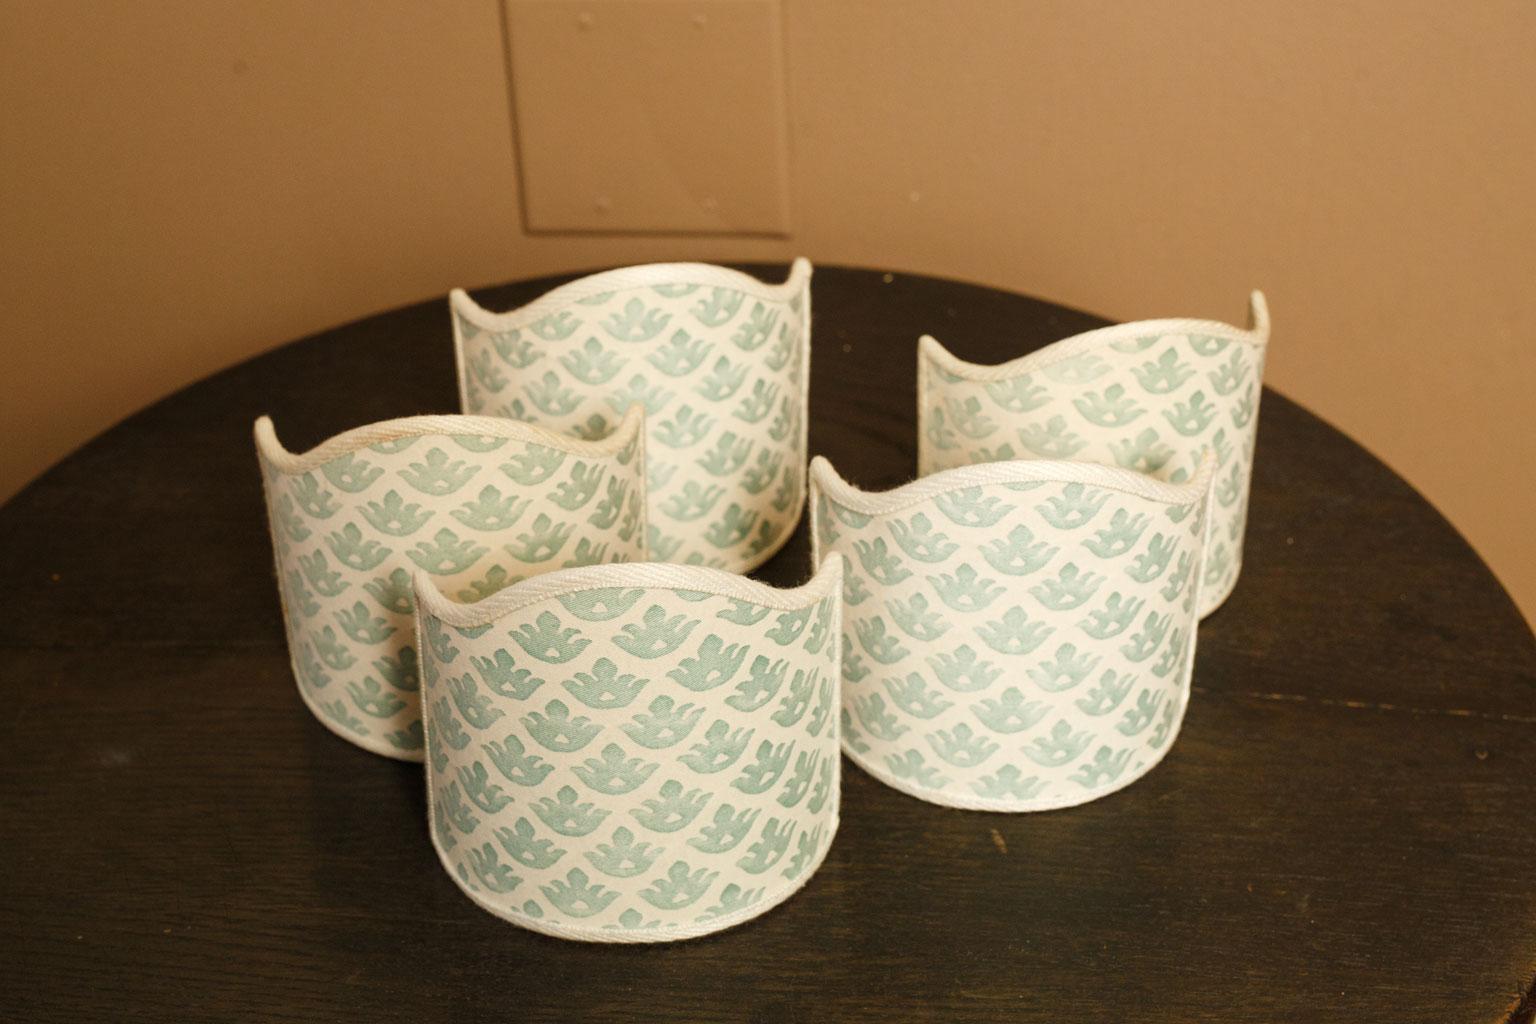 Five petite Fortuny shades in shield shape. Excellent for small table lamps or sconces. Sold as a set of five for $750.